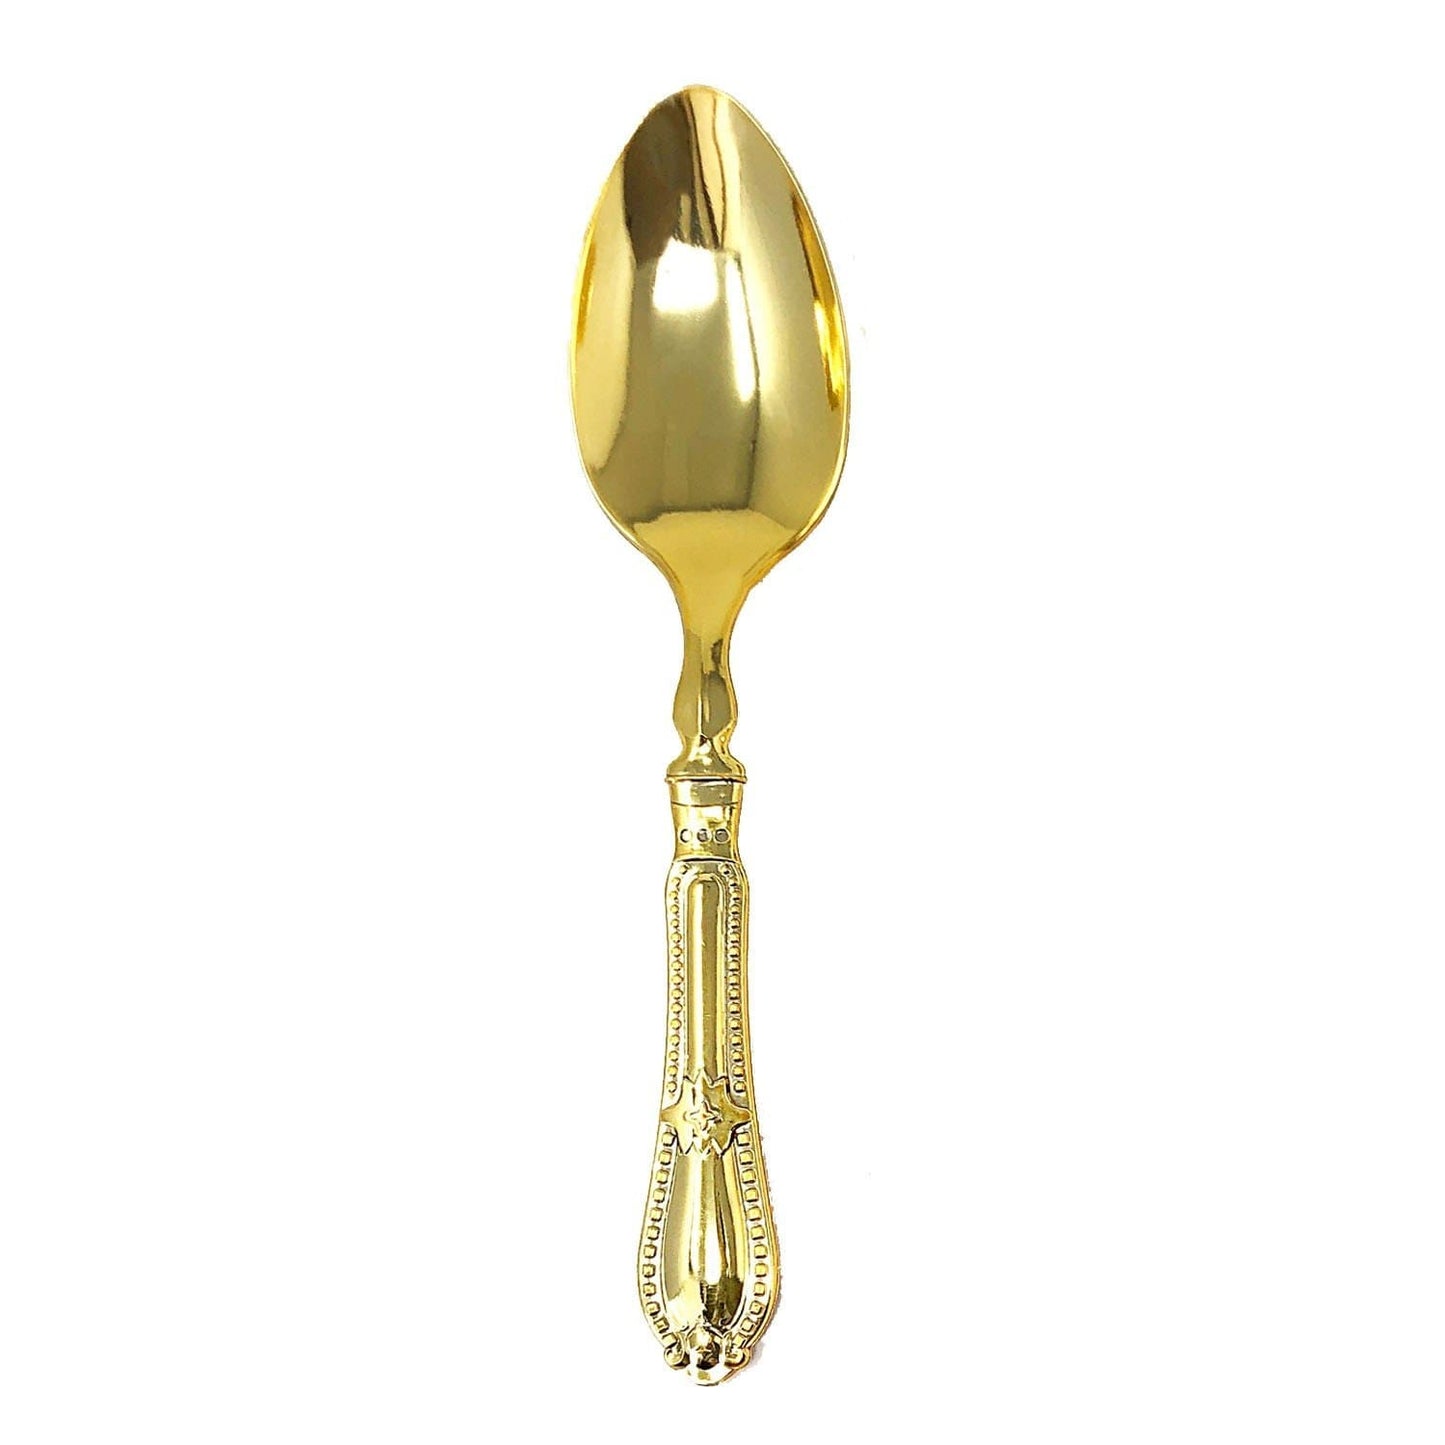 SALE Luxury Baroque Collection Gold Spoons 12 count Tablesettings Decorline   